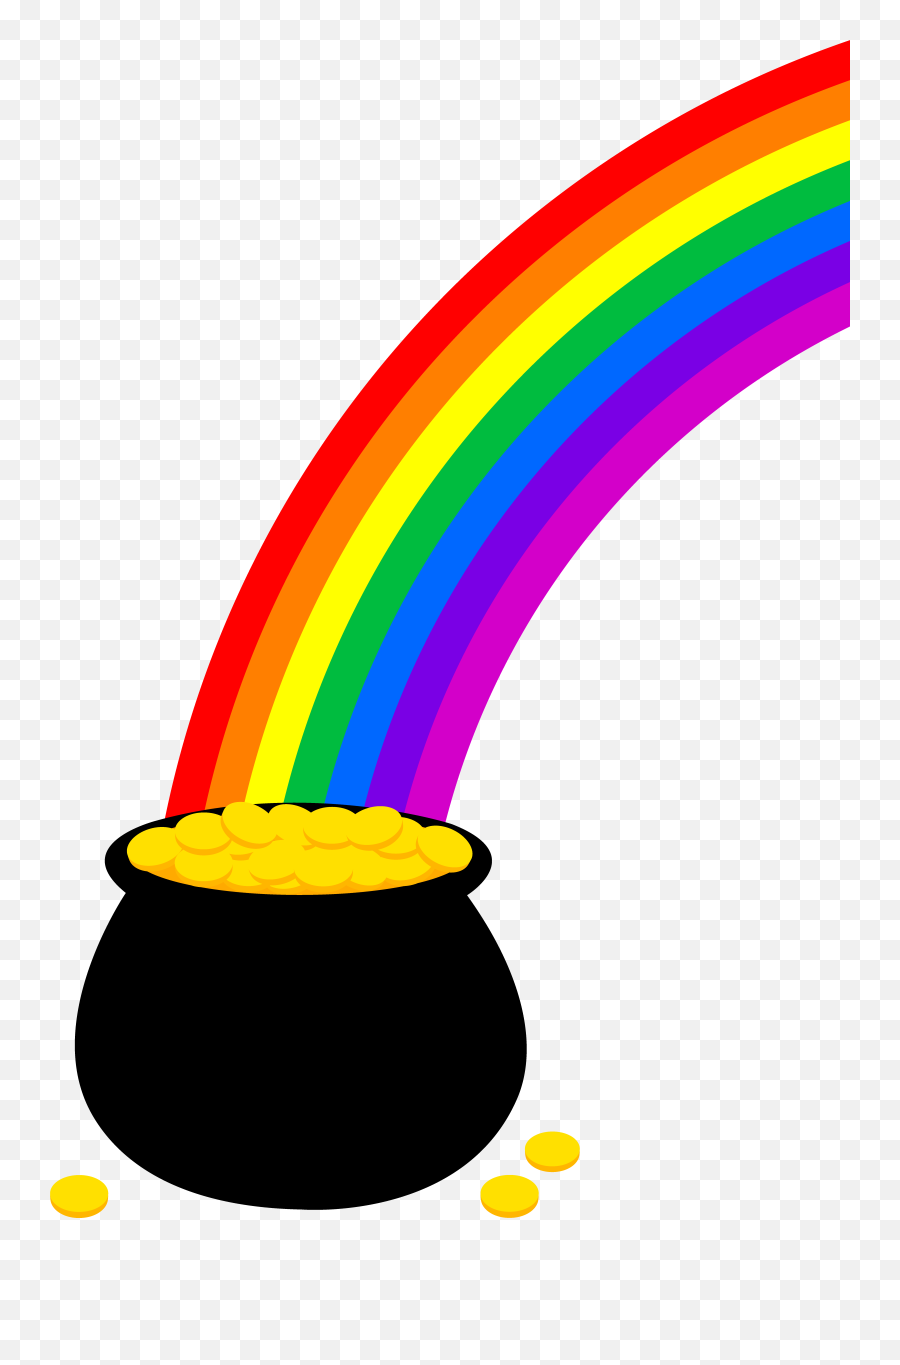 Free Pictures Of A Pot Of Gold Download Free Clip Art Free Emoji,St Patrick's Day Emoji Art